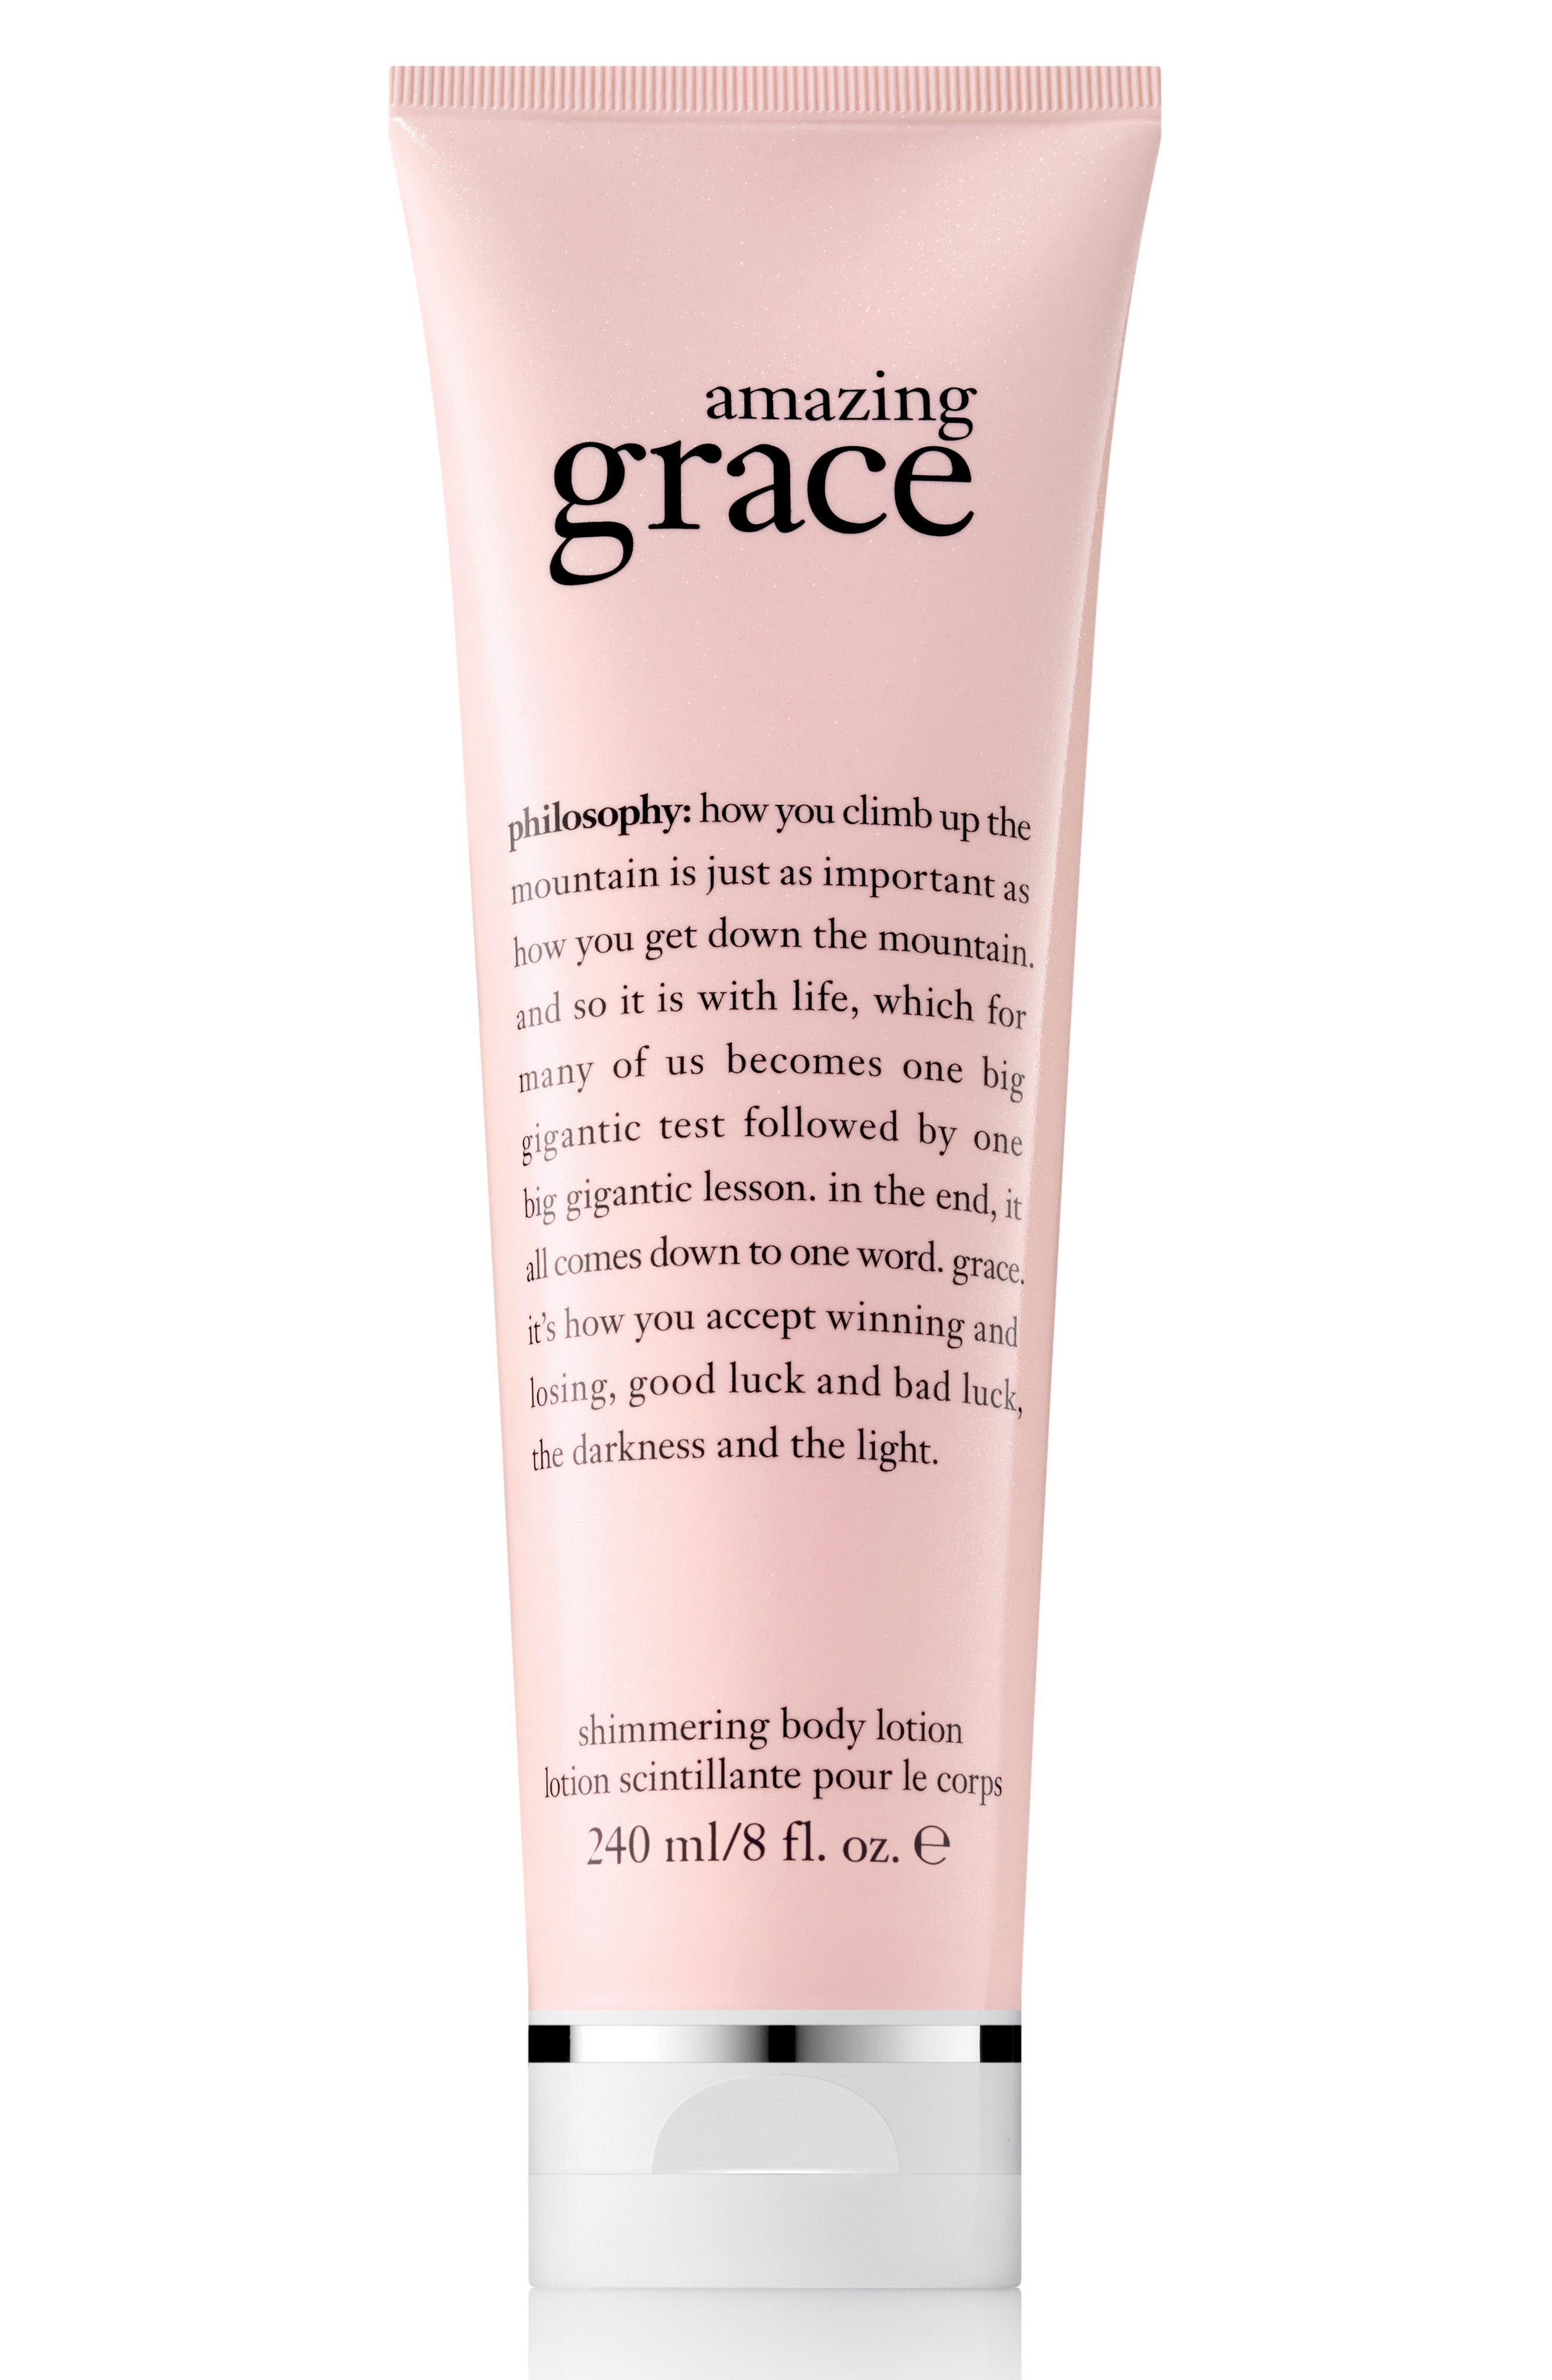 EAN 3614224278380 product image for Philosophy Amazing Grace Shimmering Body Lotion | upcitemdb.com